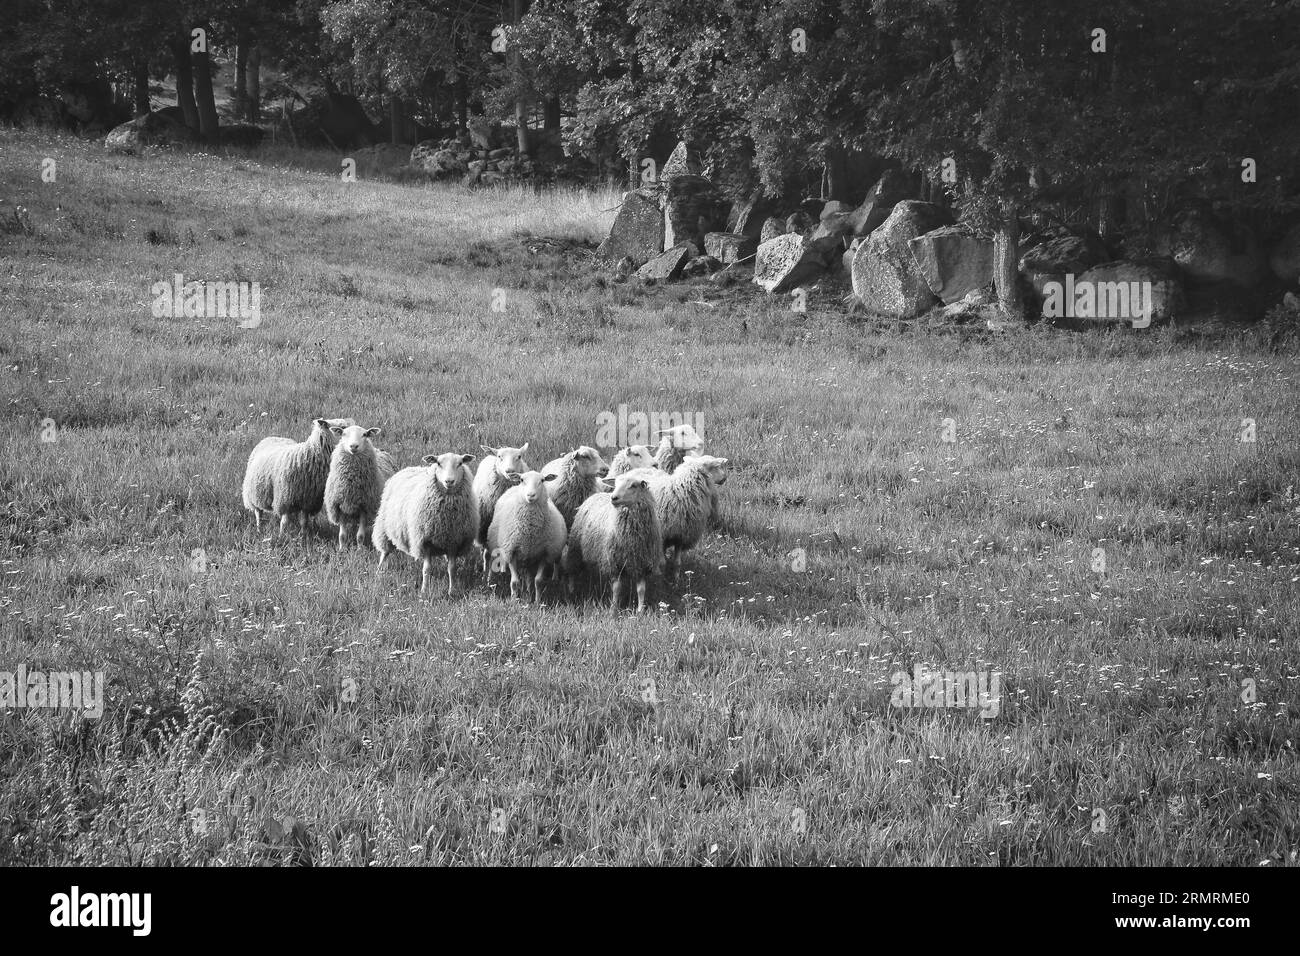 Flock of sheep on a green meadow of grass taken in black and white. Scandinavian landscape. Farm animal with wool. Animal shot Stock Photo